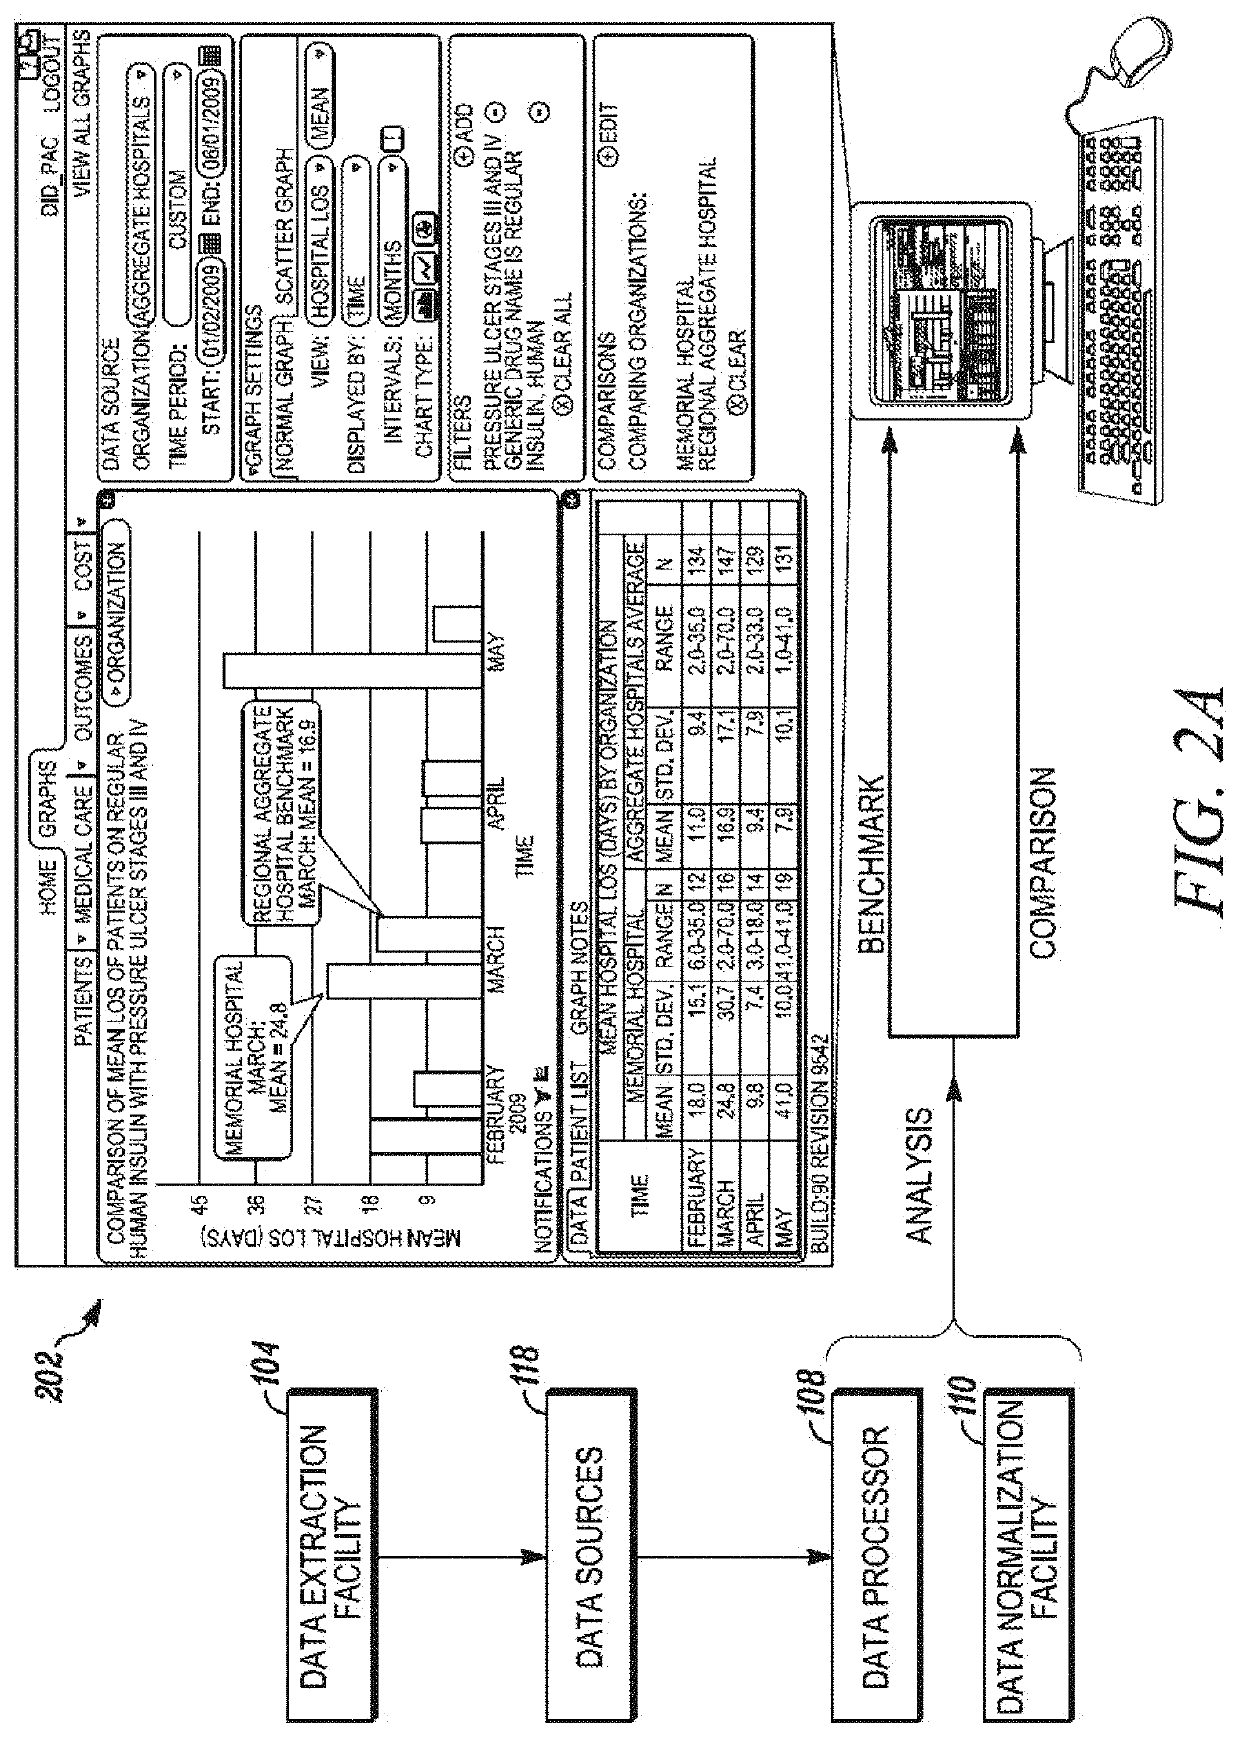 Data processing systems and methods implementing improved analytics platform and networked information systems